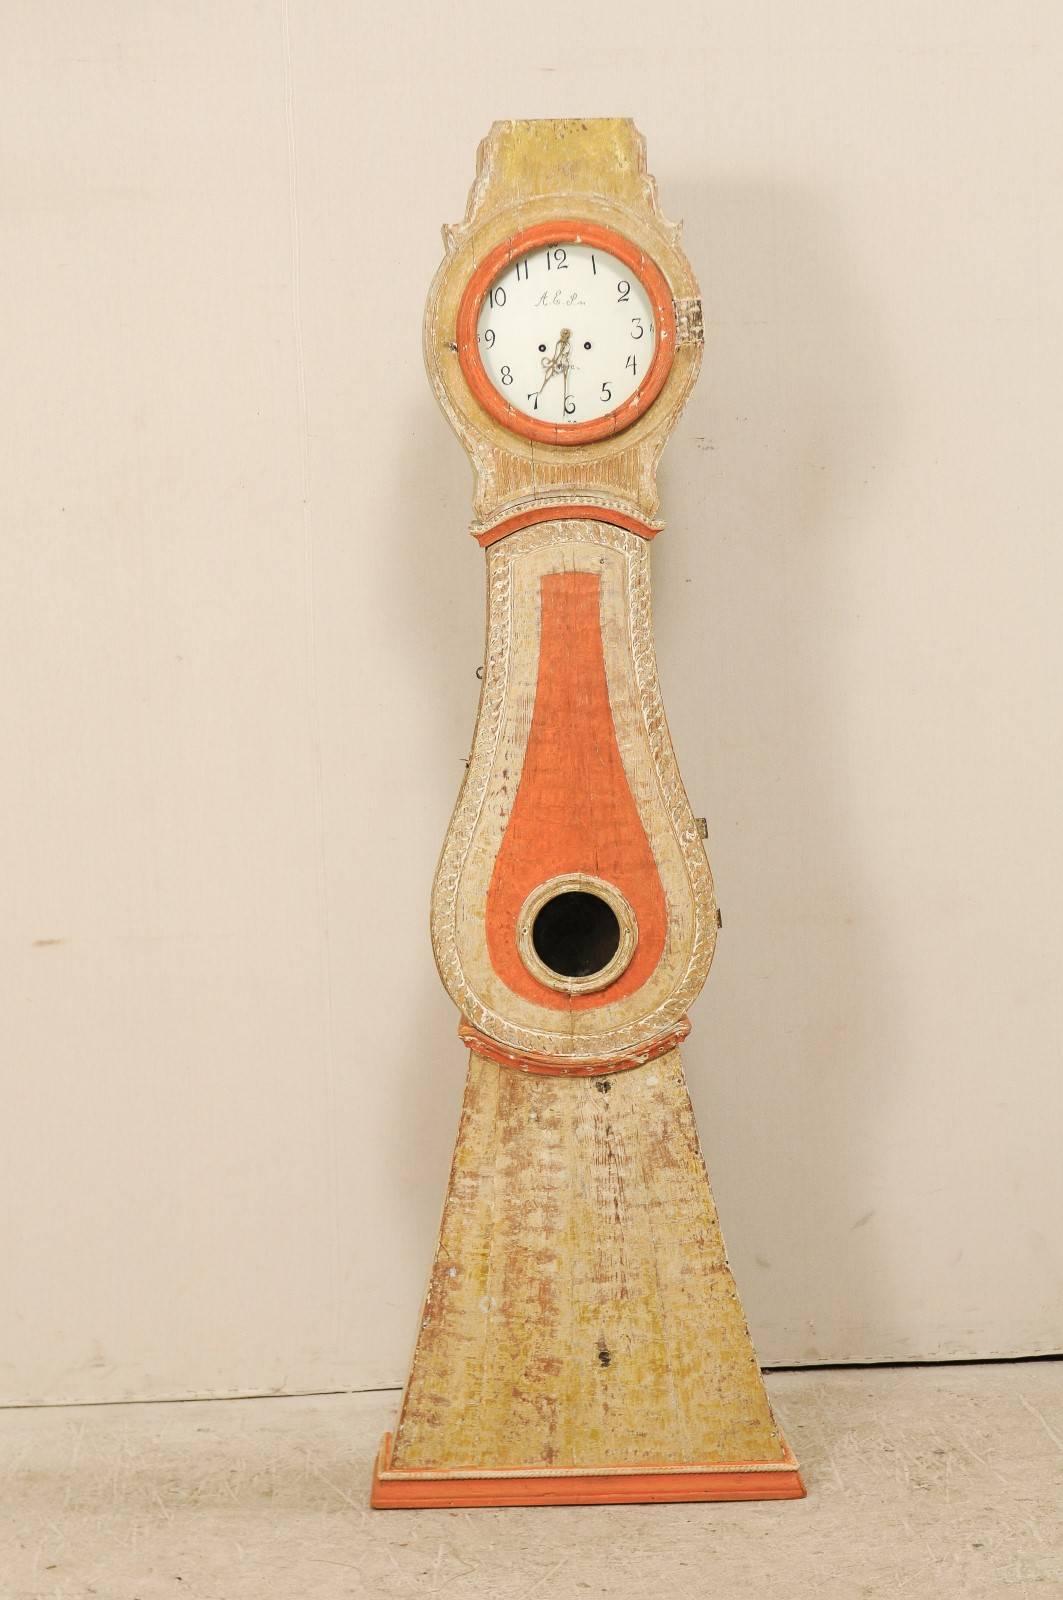 A 19th century painted wood Swedish clock. This Swedish clock from the 1820s features a raised crest, round face, a raindrop shaped belly and triangular bottom. This clock retains it's original metal face, hands and movement.  There are vertical and